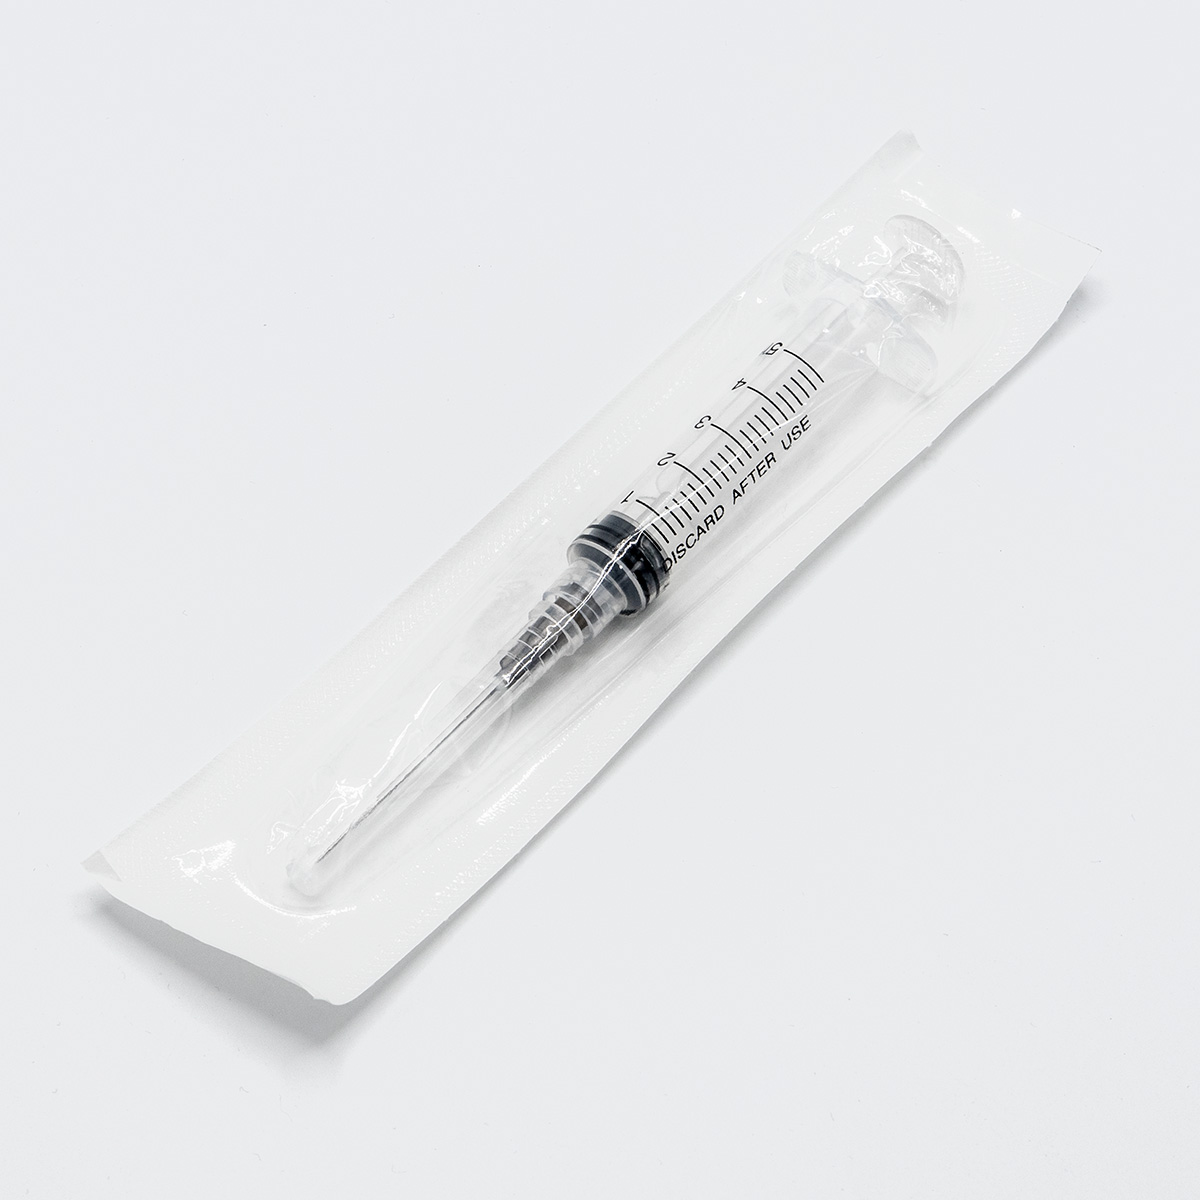 Injection syringes with pre-assembled needle